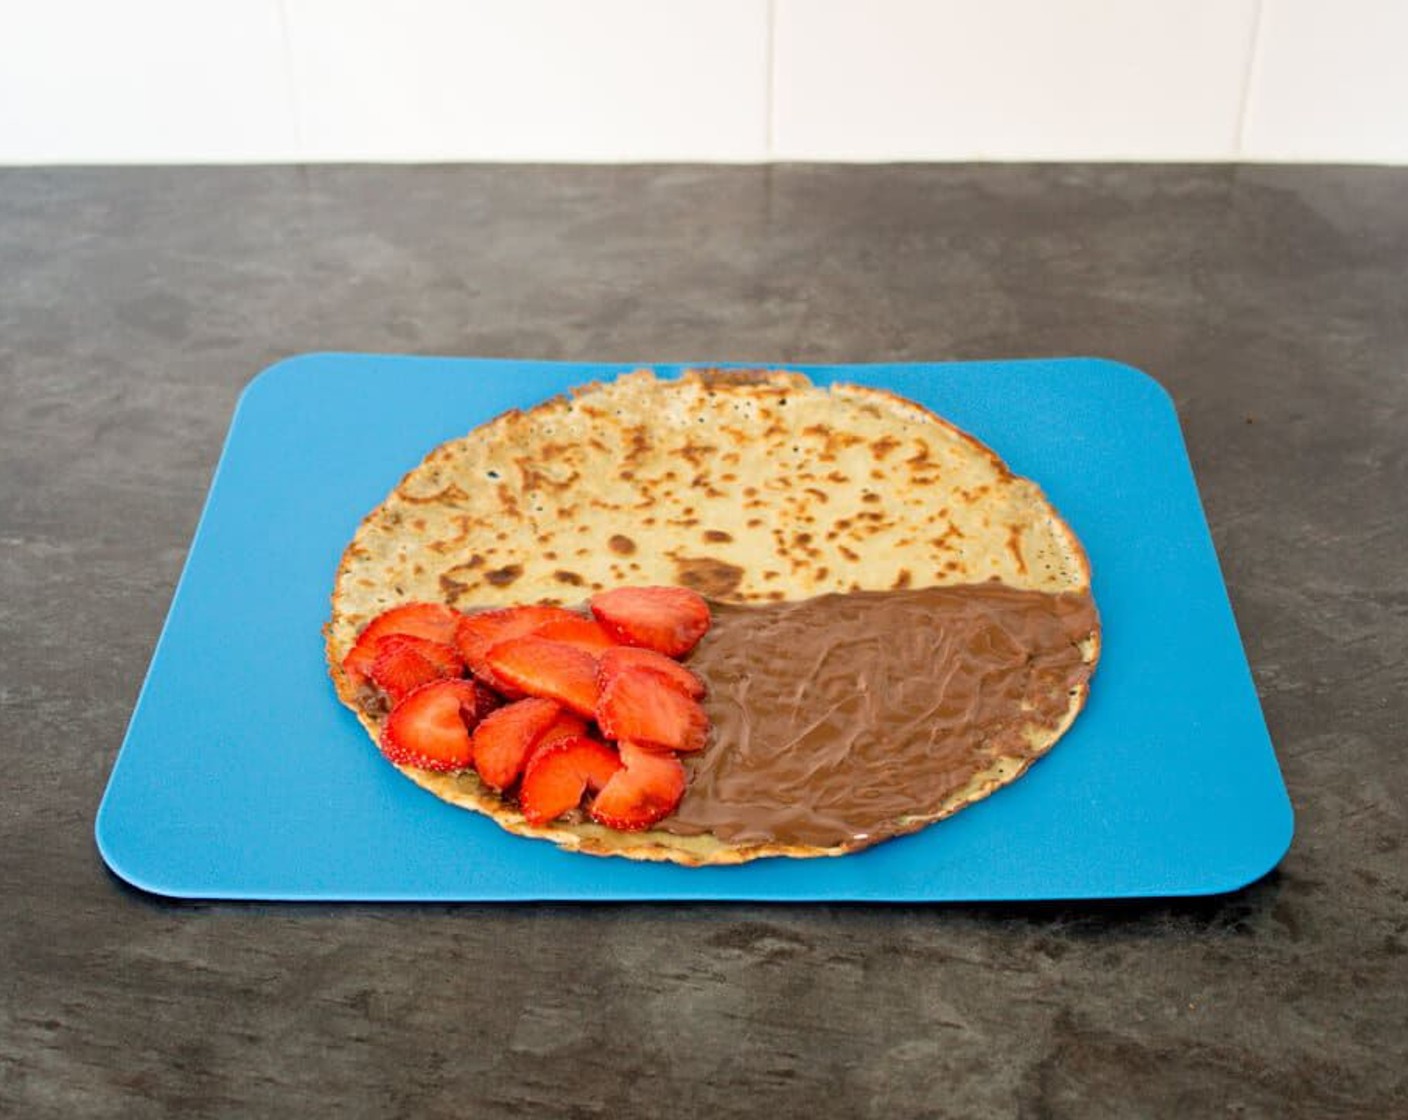 step 9 Slide the crepe out the pan and onto a chopping board or mat. Smear half the crepe with warmed Nutella or Biscoff. Top a quarter of the Nutella/Biscoff half with sliced strawberries.